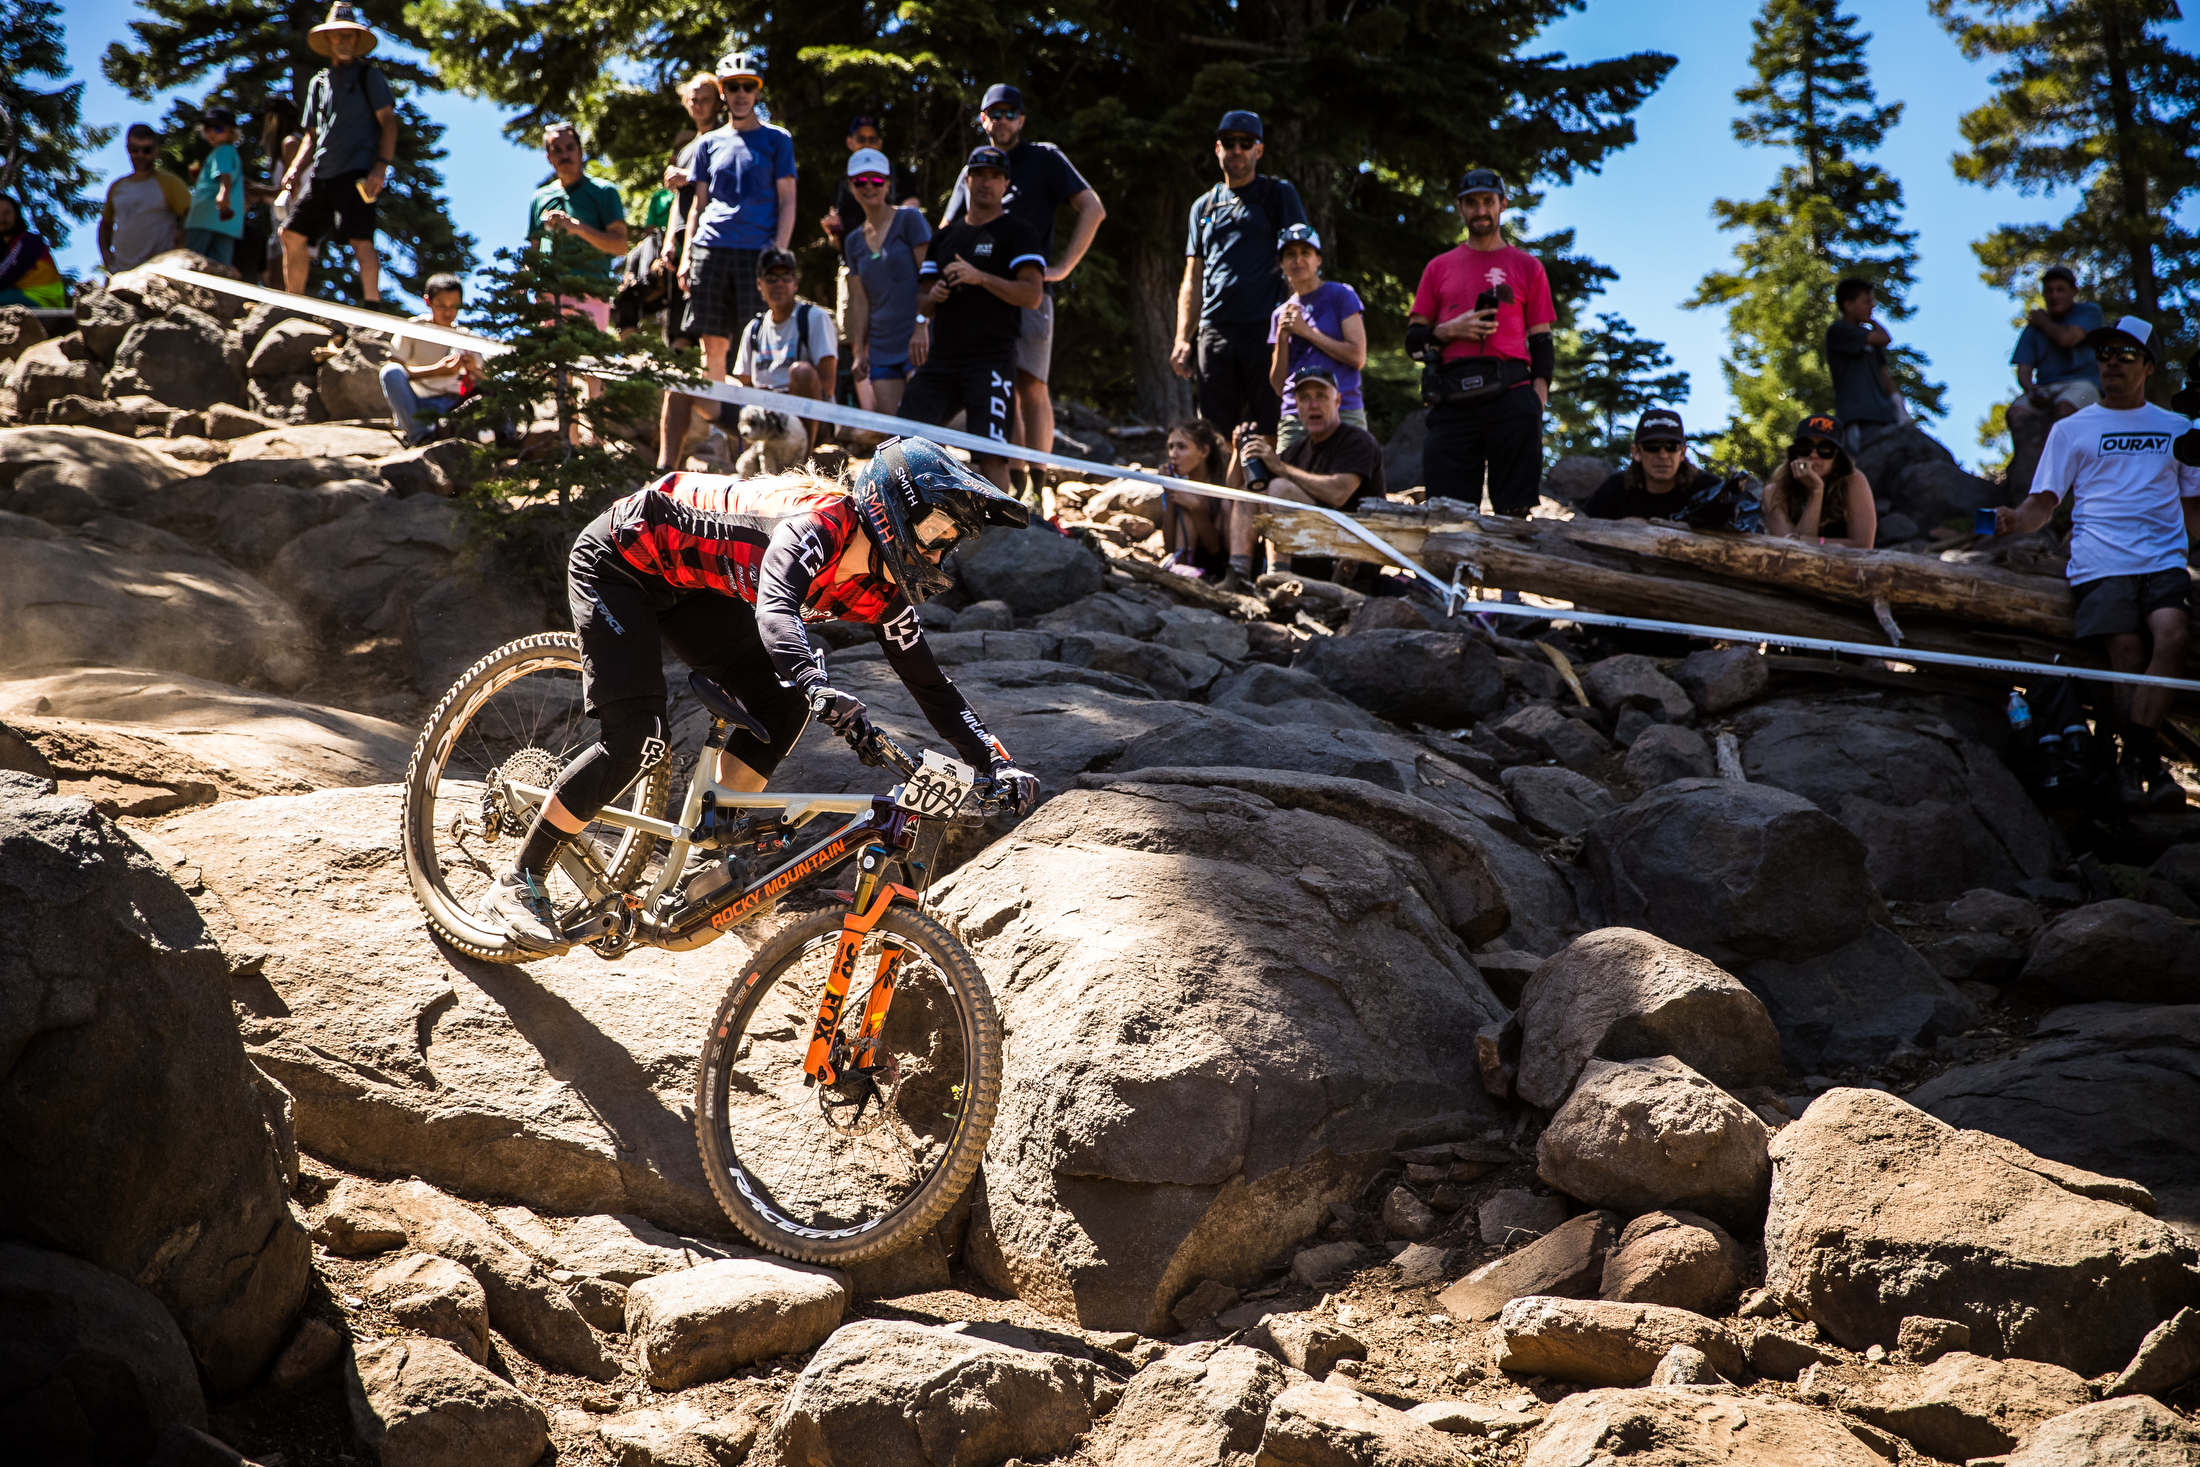 Andreane Lanthier Nadeau keeps her eyes up through an off-camber rock section.